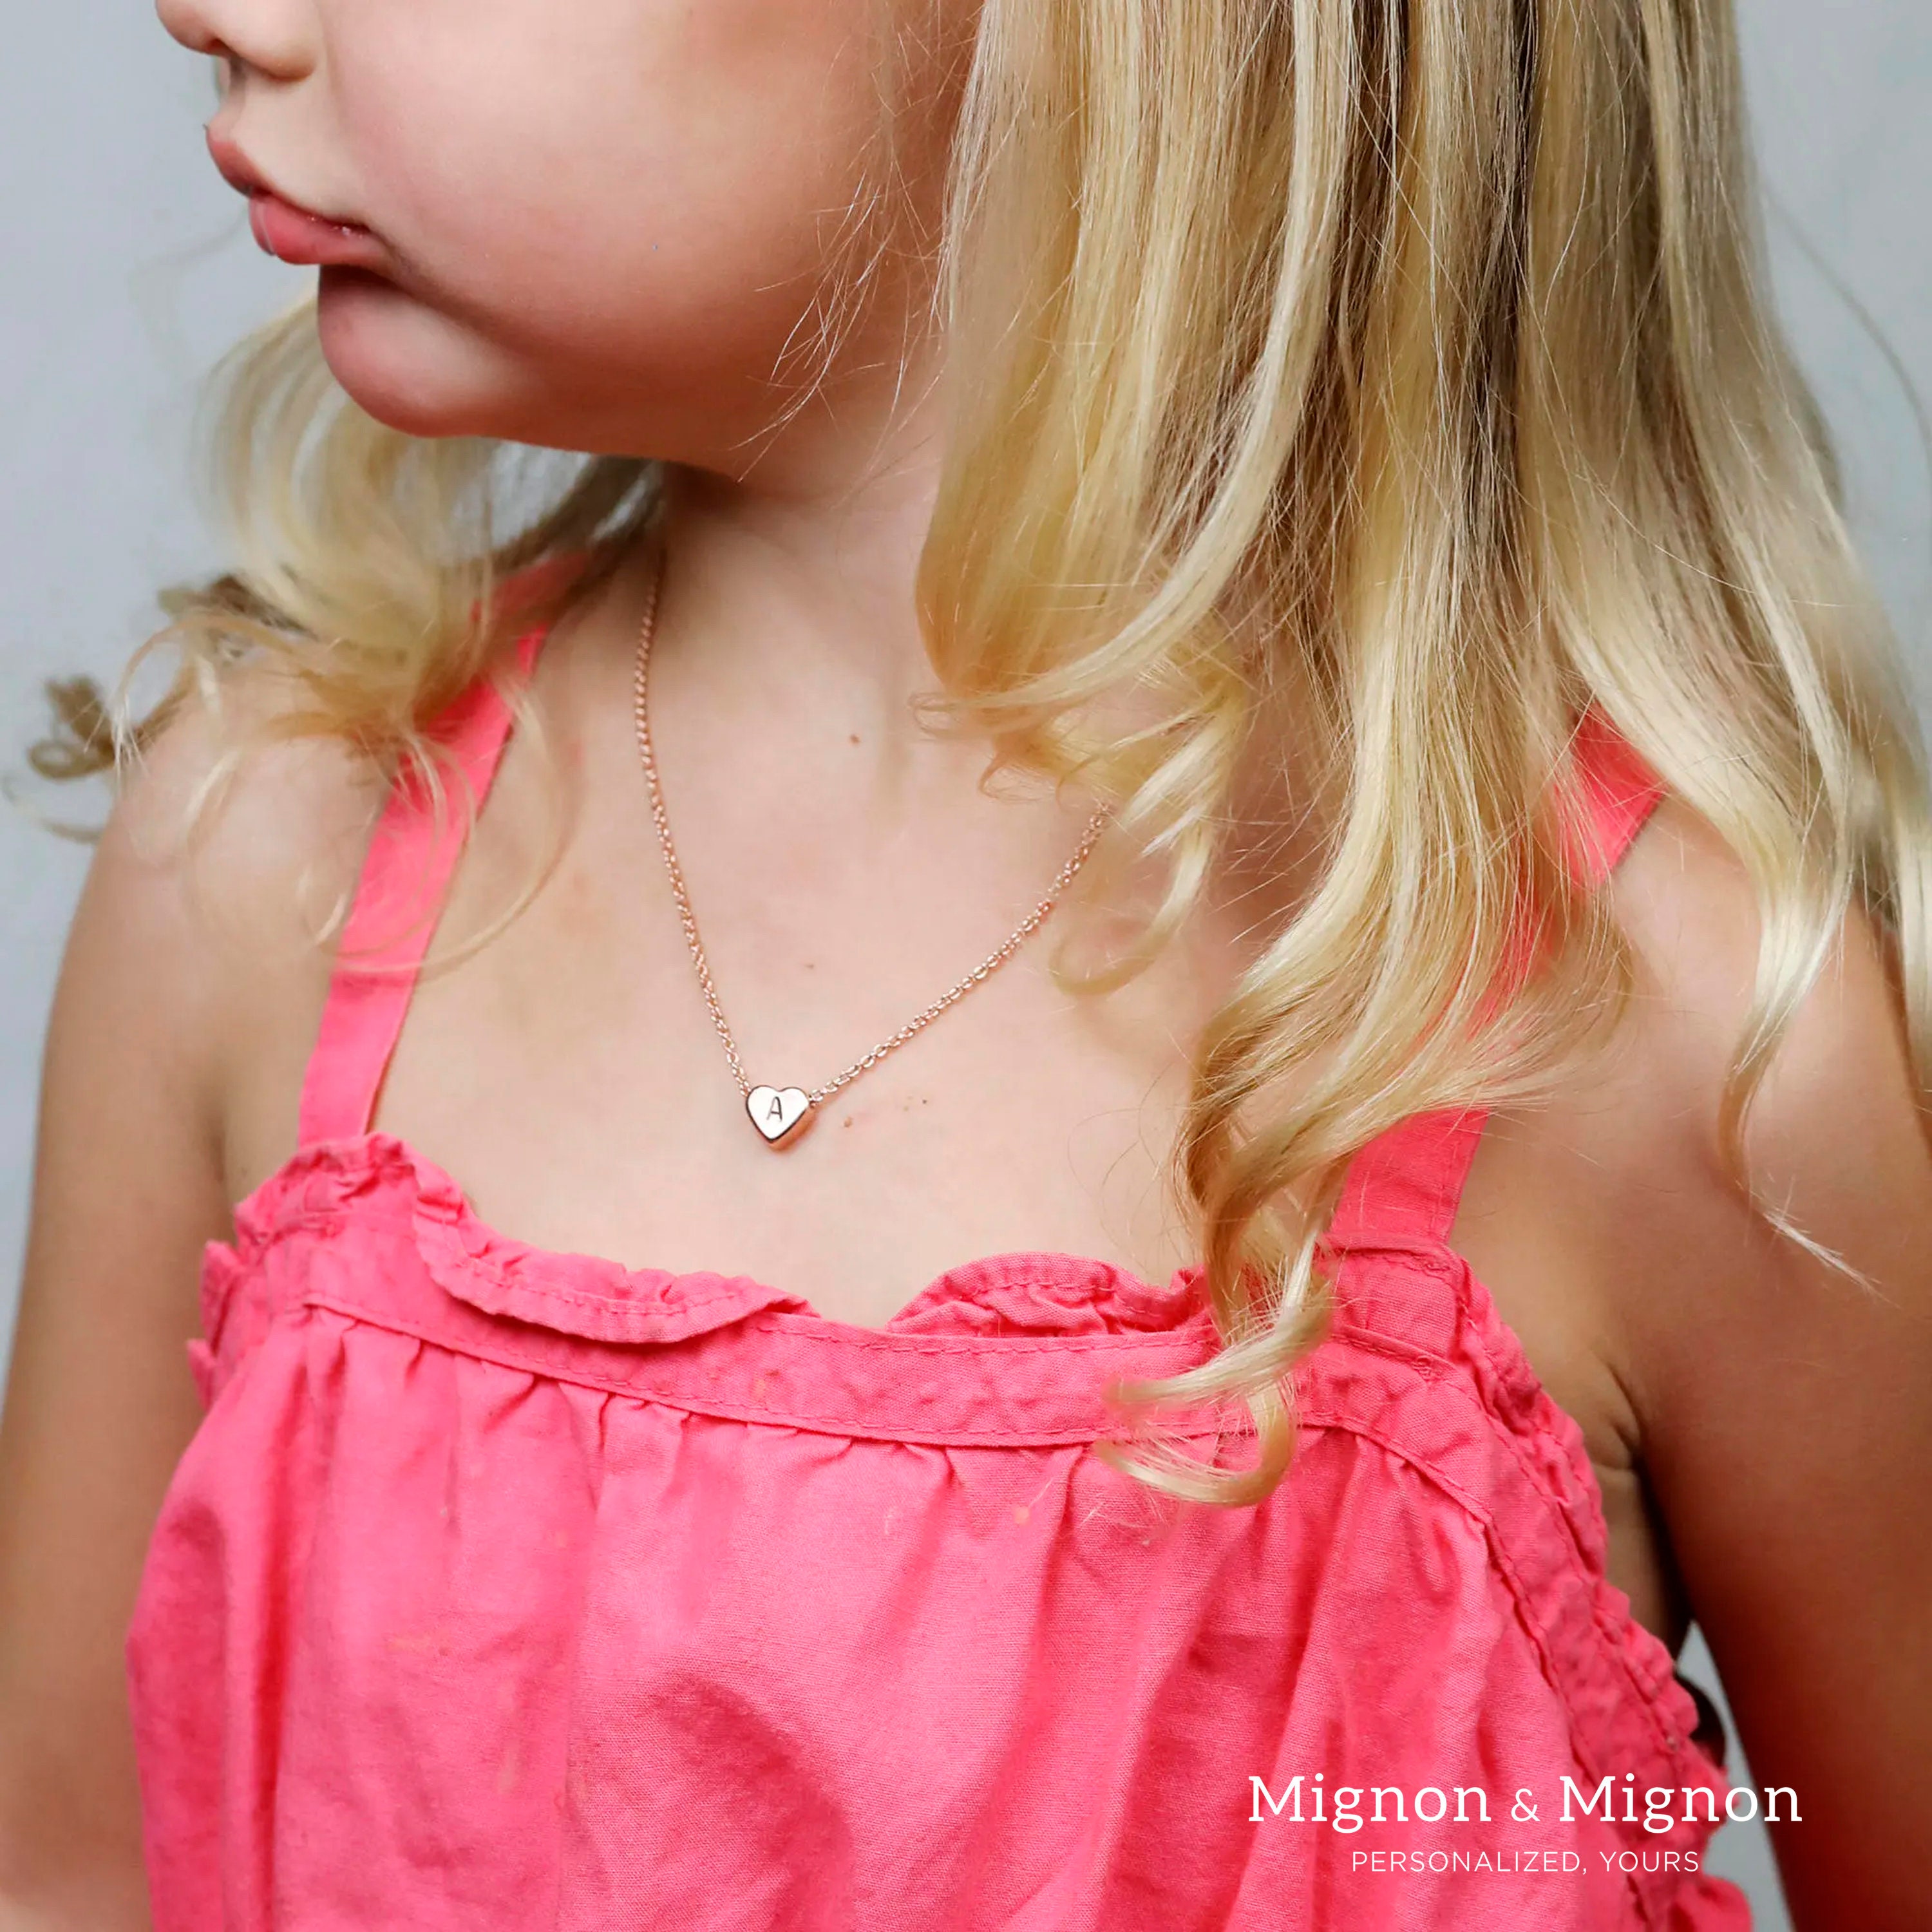 Attached Pendant Necklace with Childs Artwork- Formia®Design